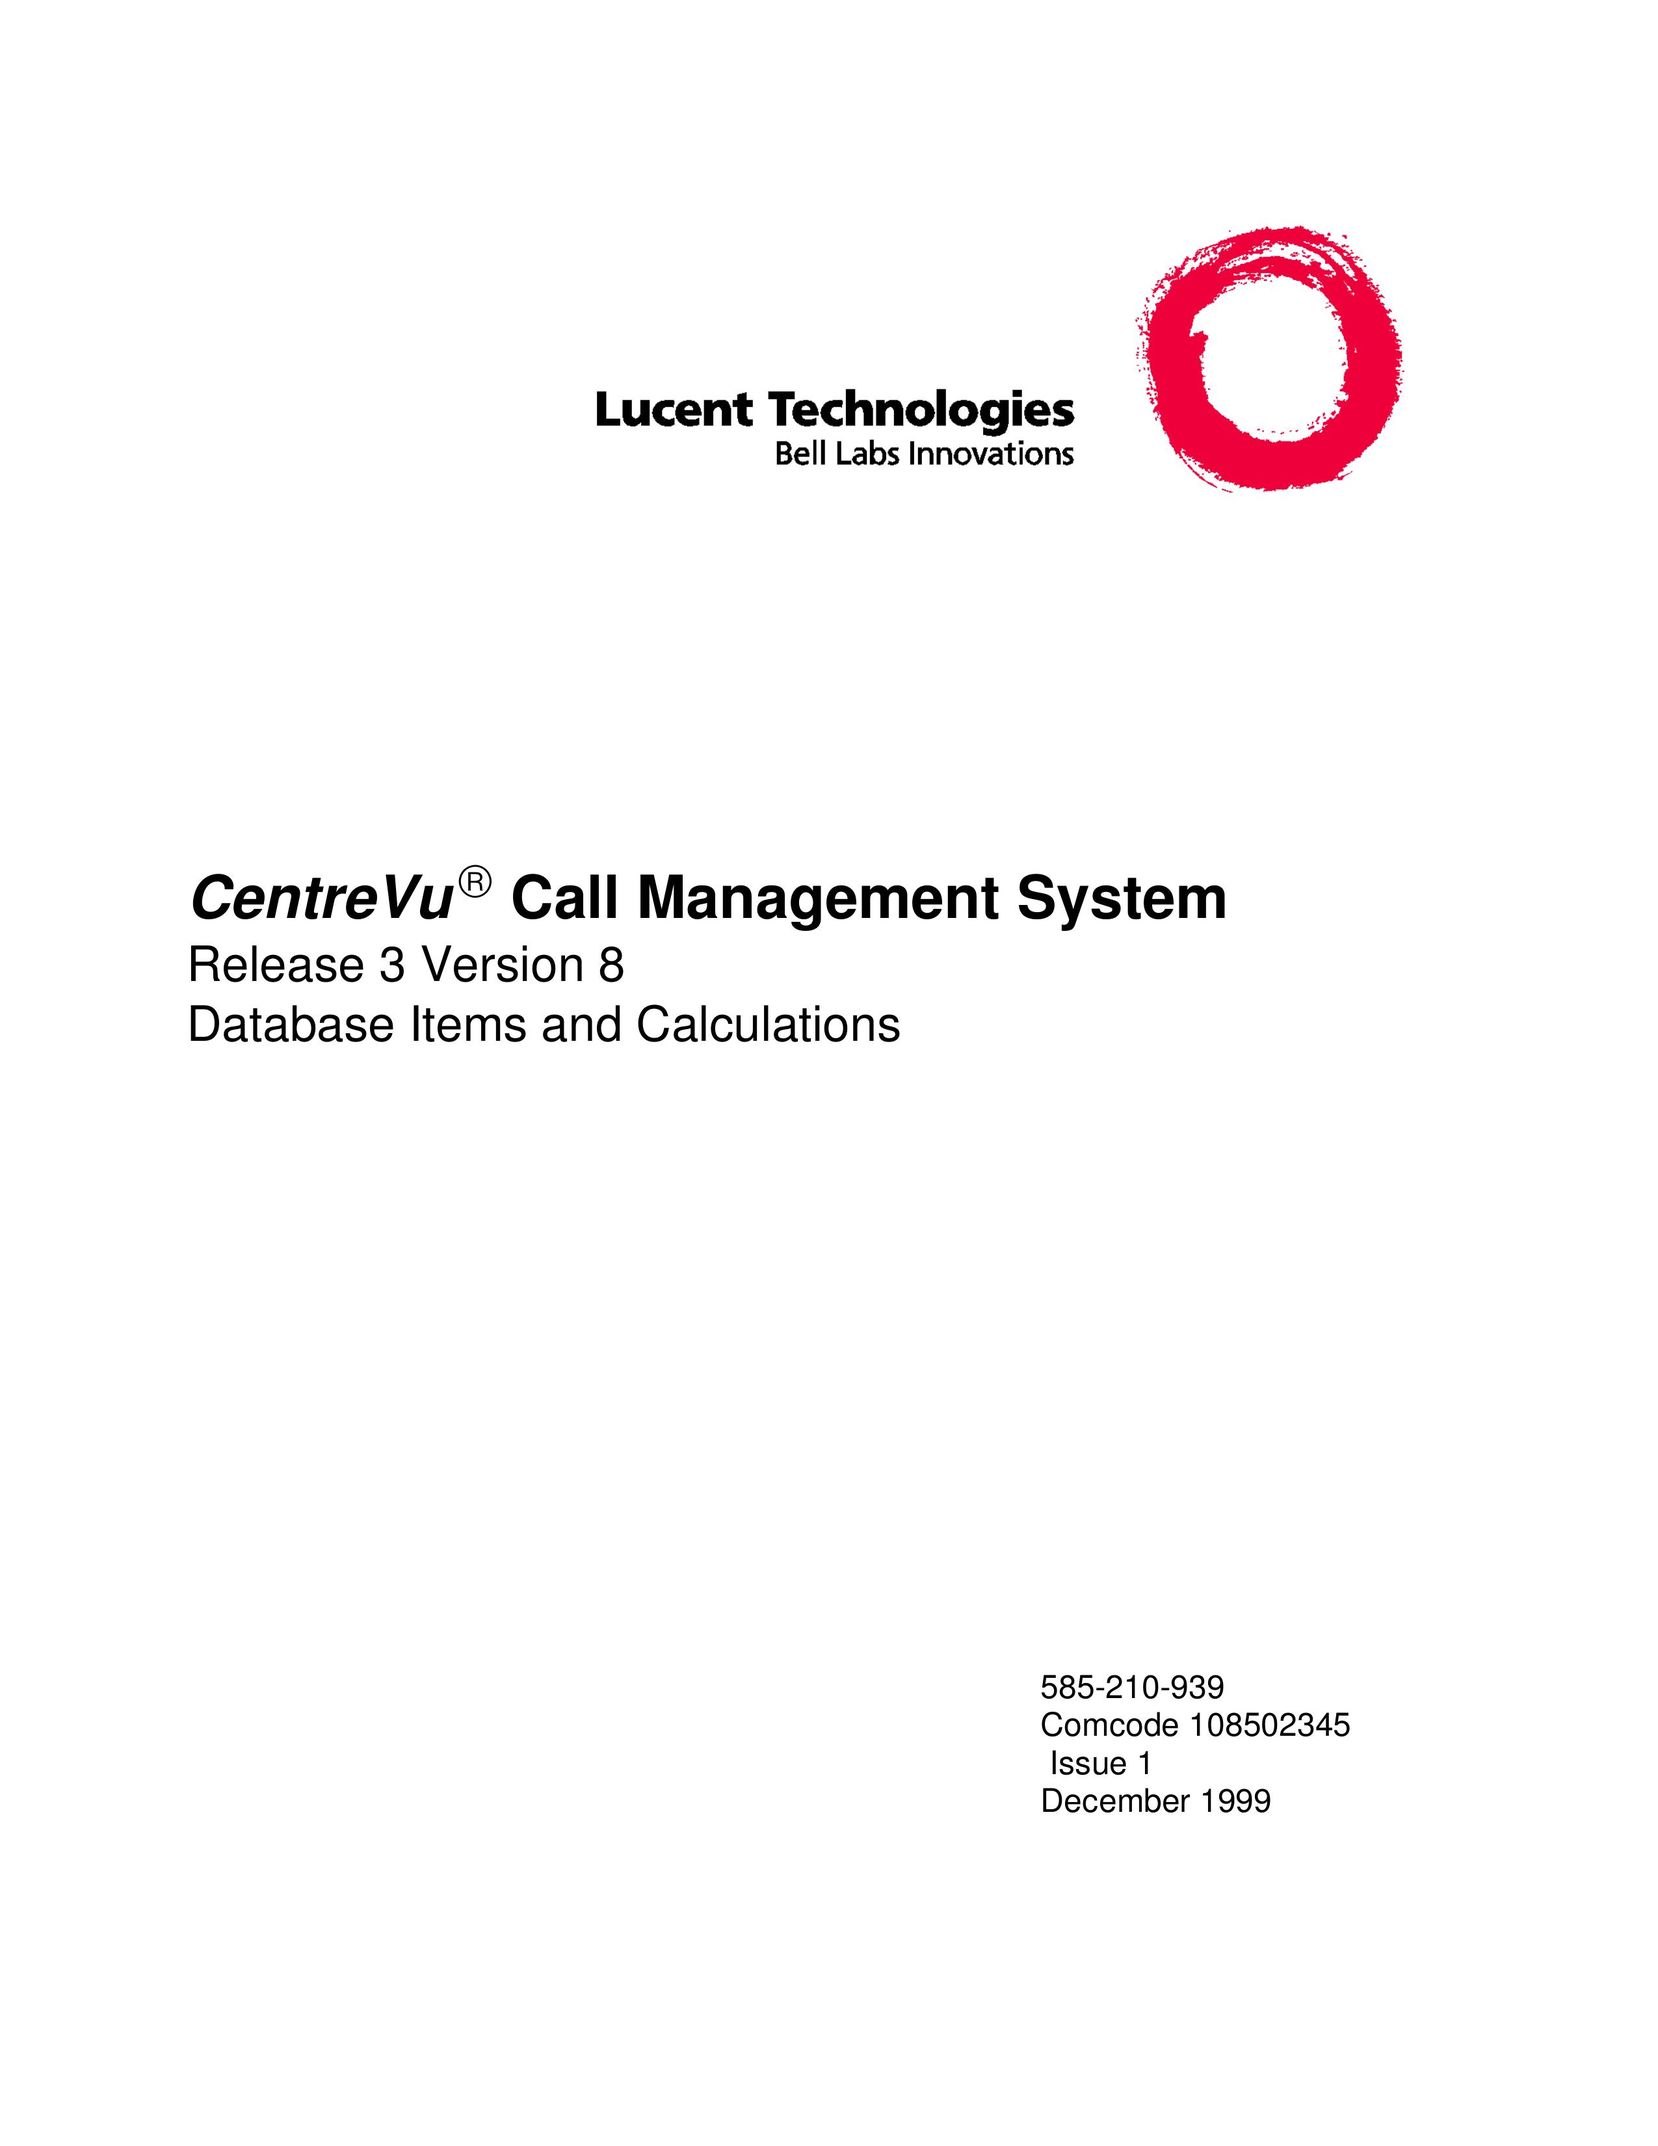 Lucent Technologies Release 3 Version 8 Caller ID Box User Manual